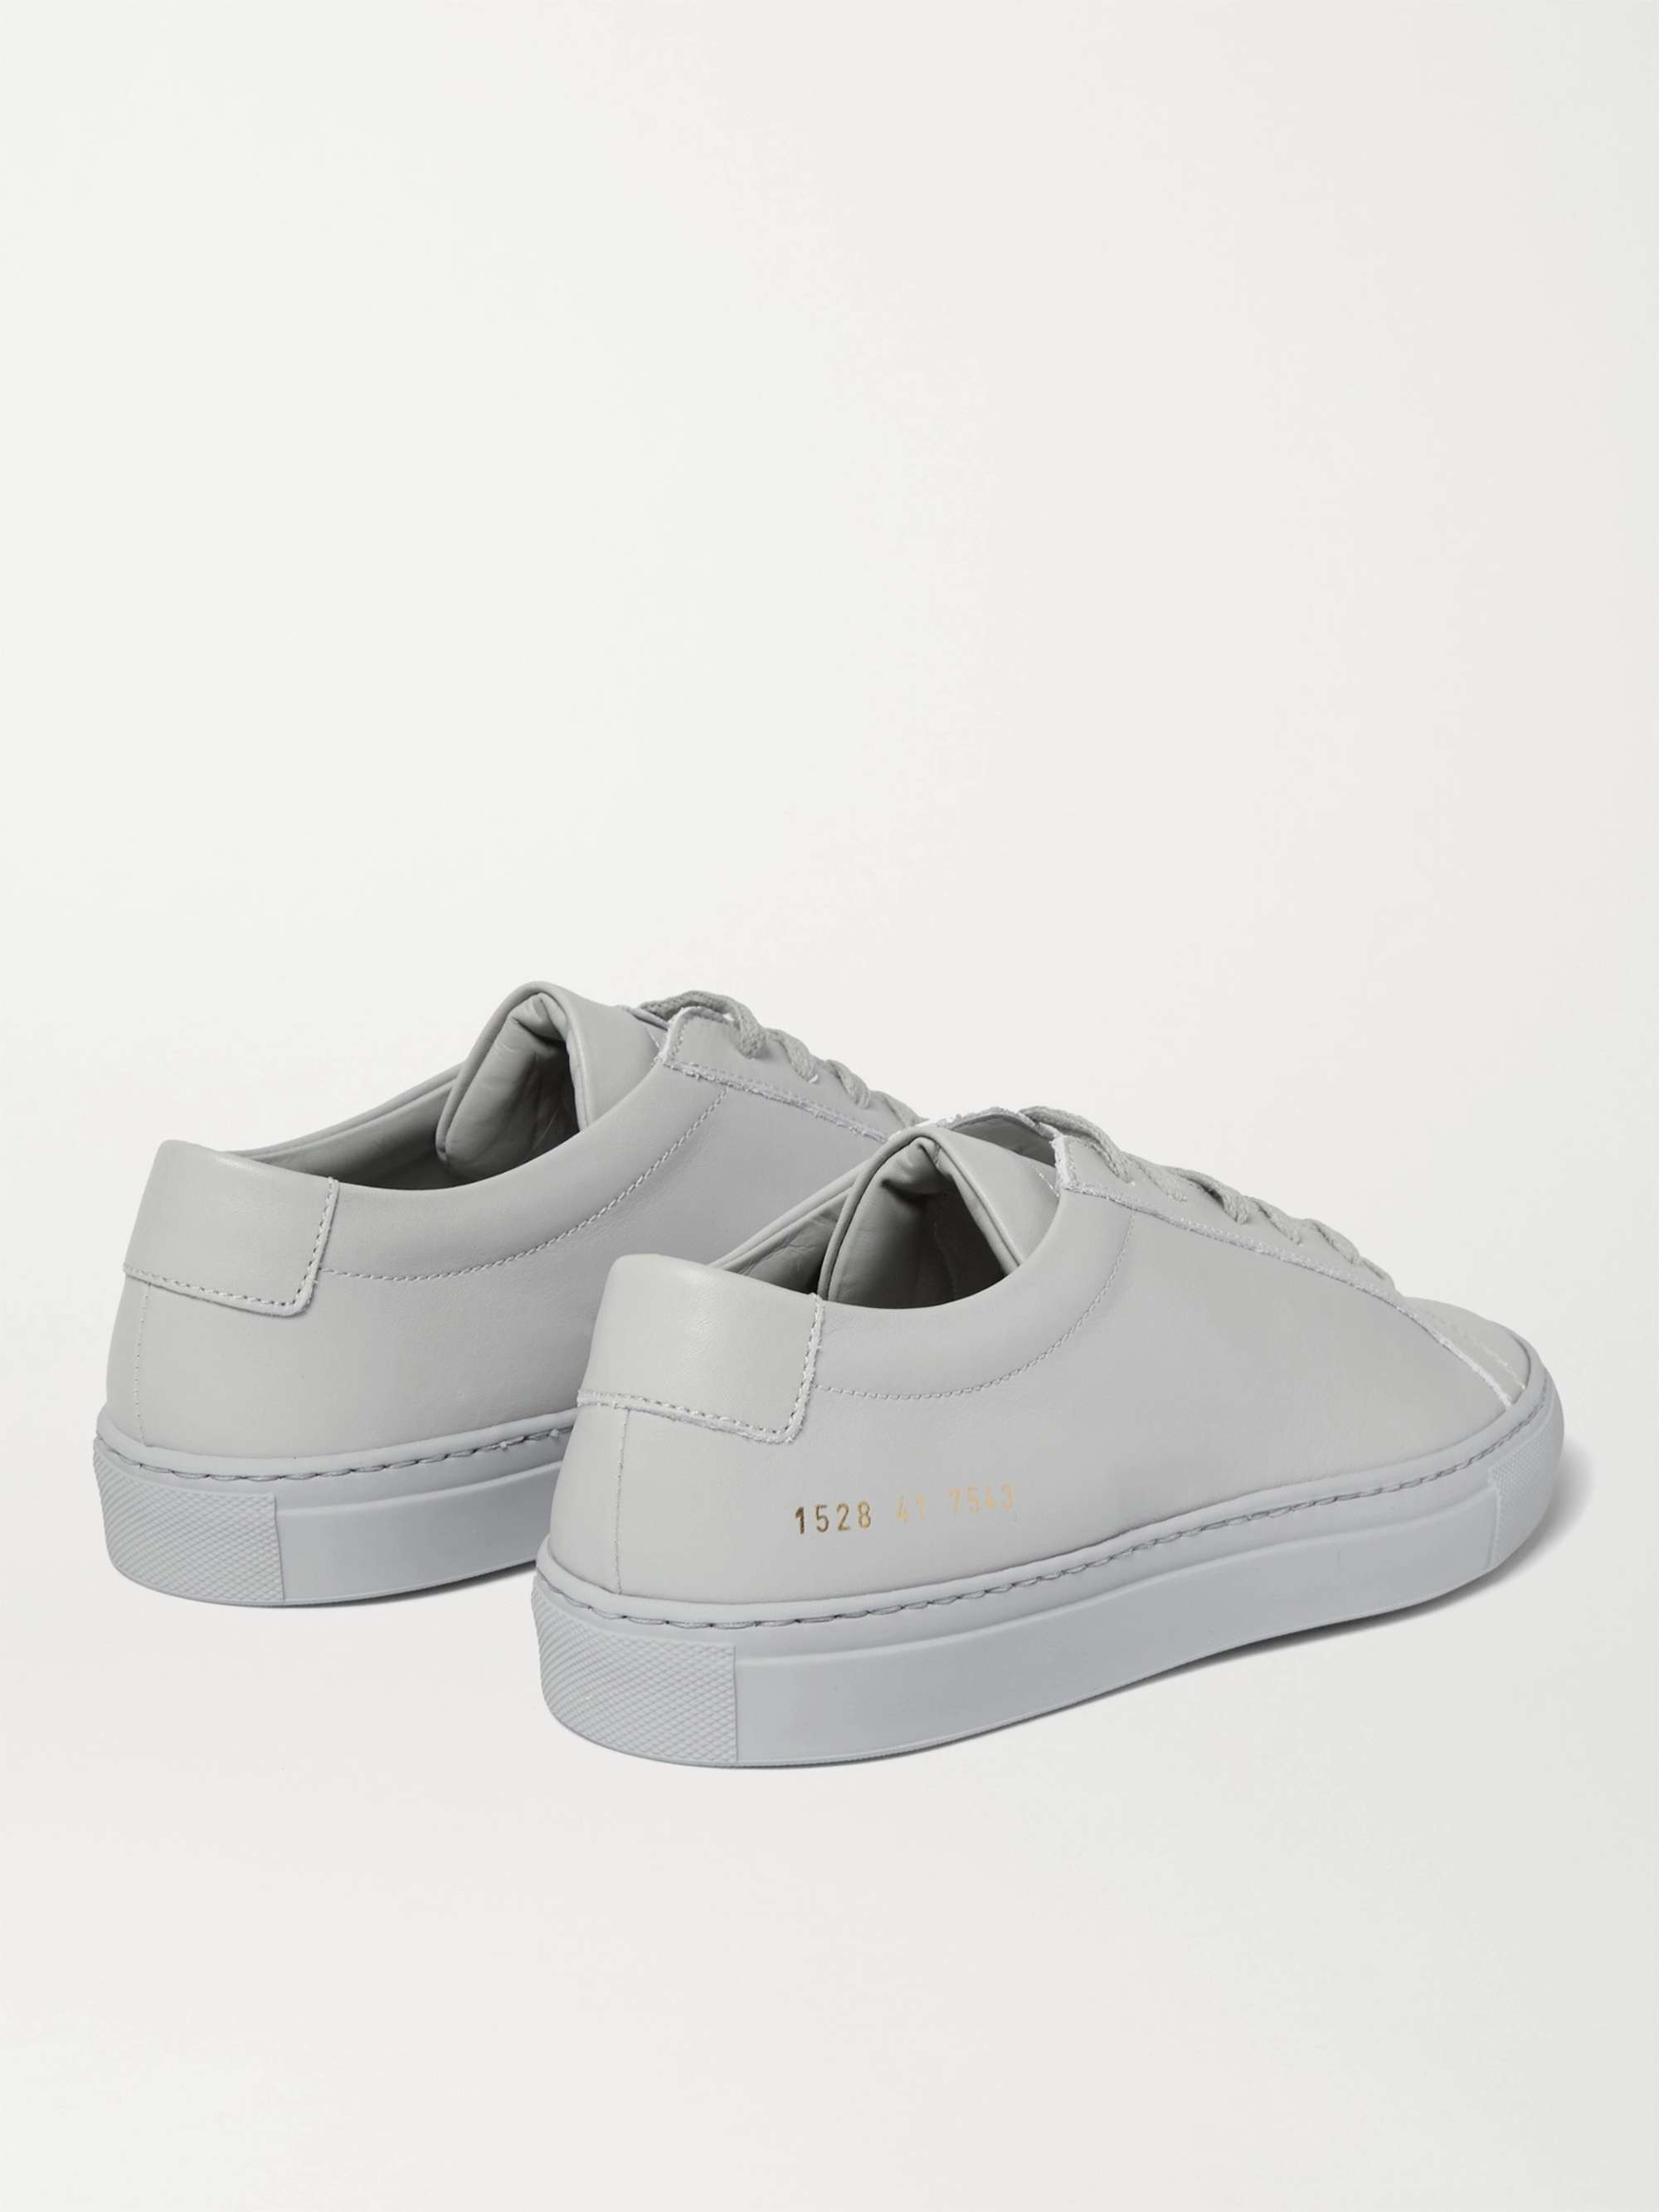 Light gray Original Achilles Leather Sneakers | COMMON PROJECTS | MR PORTER